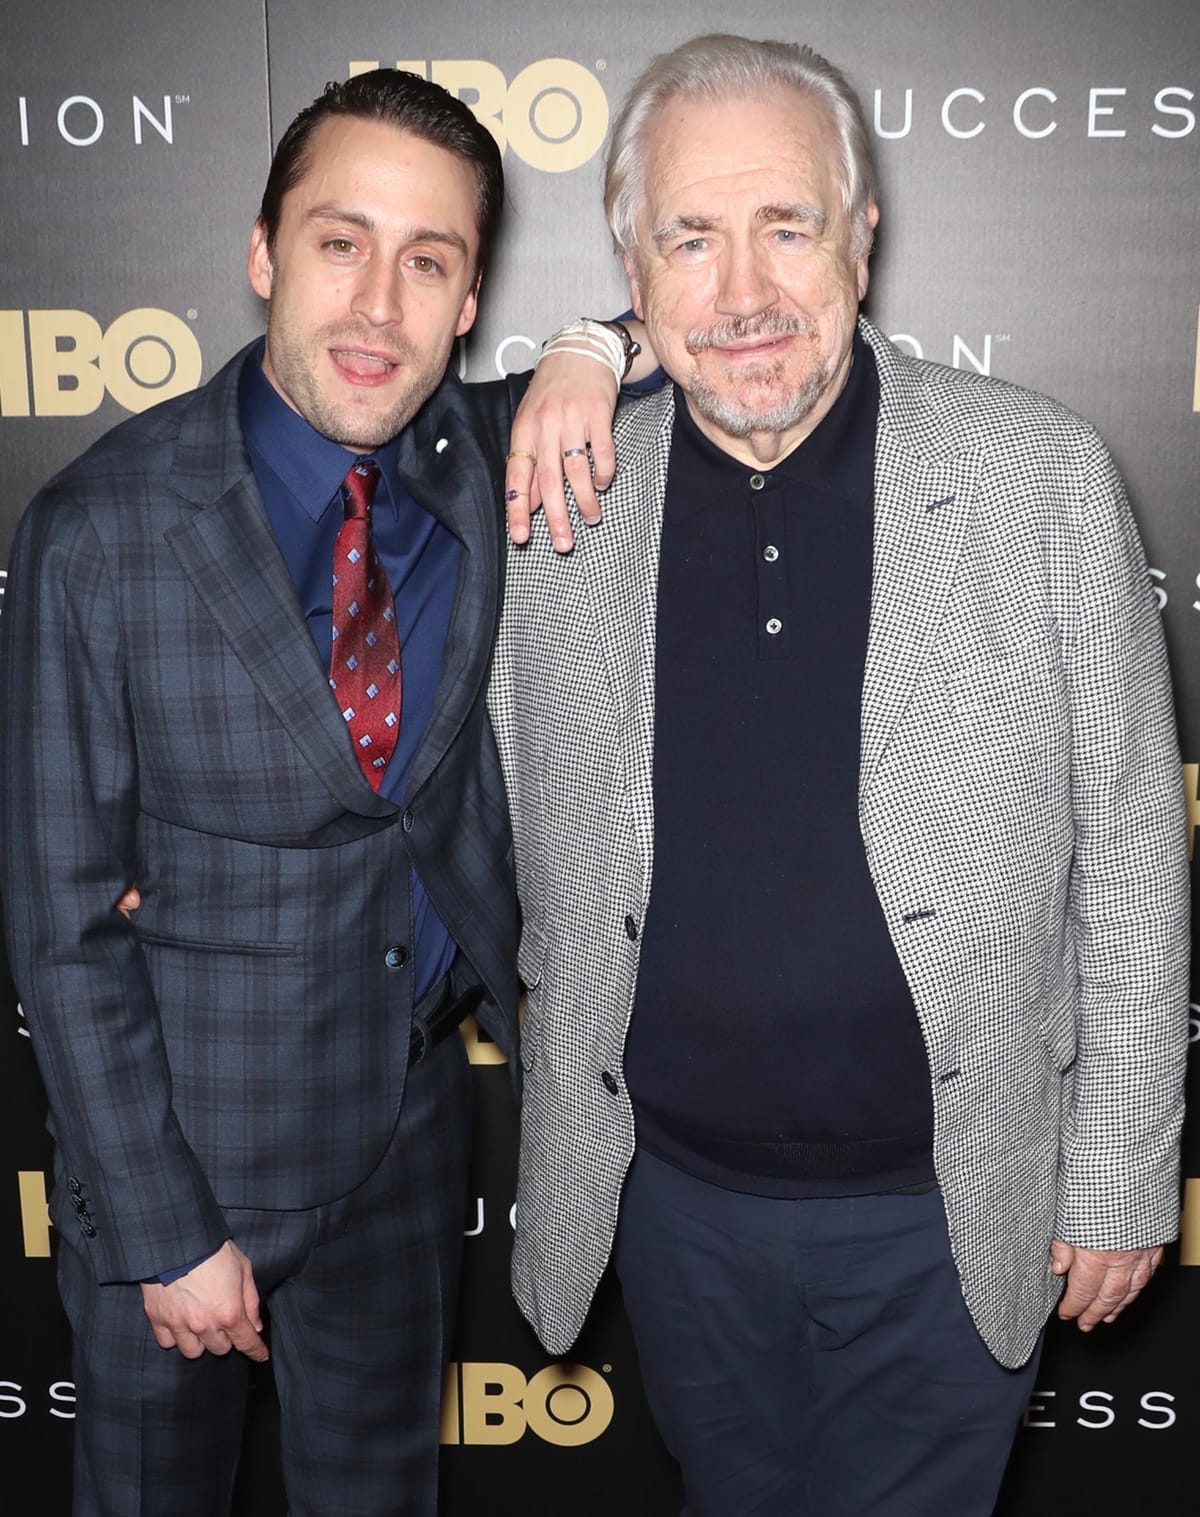 Kieran Culkin is significantly shorter than his Succession co-star Brian Cox